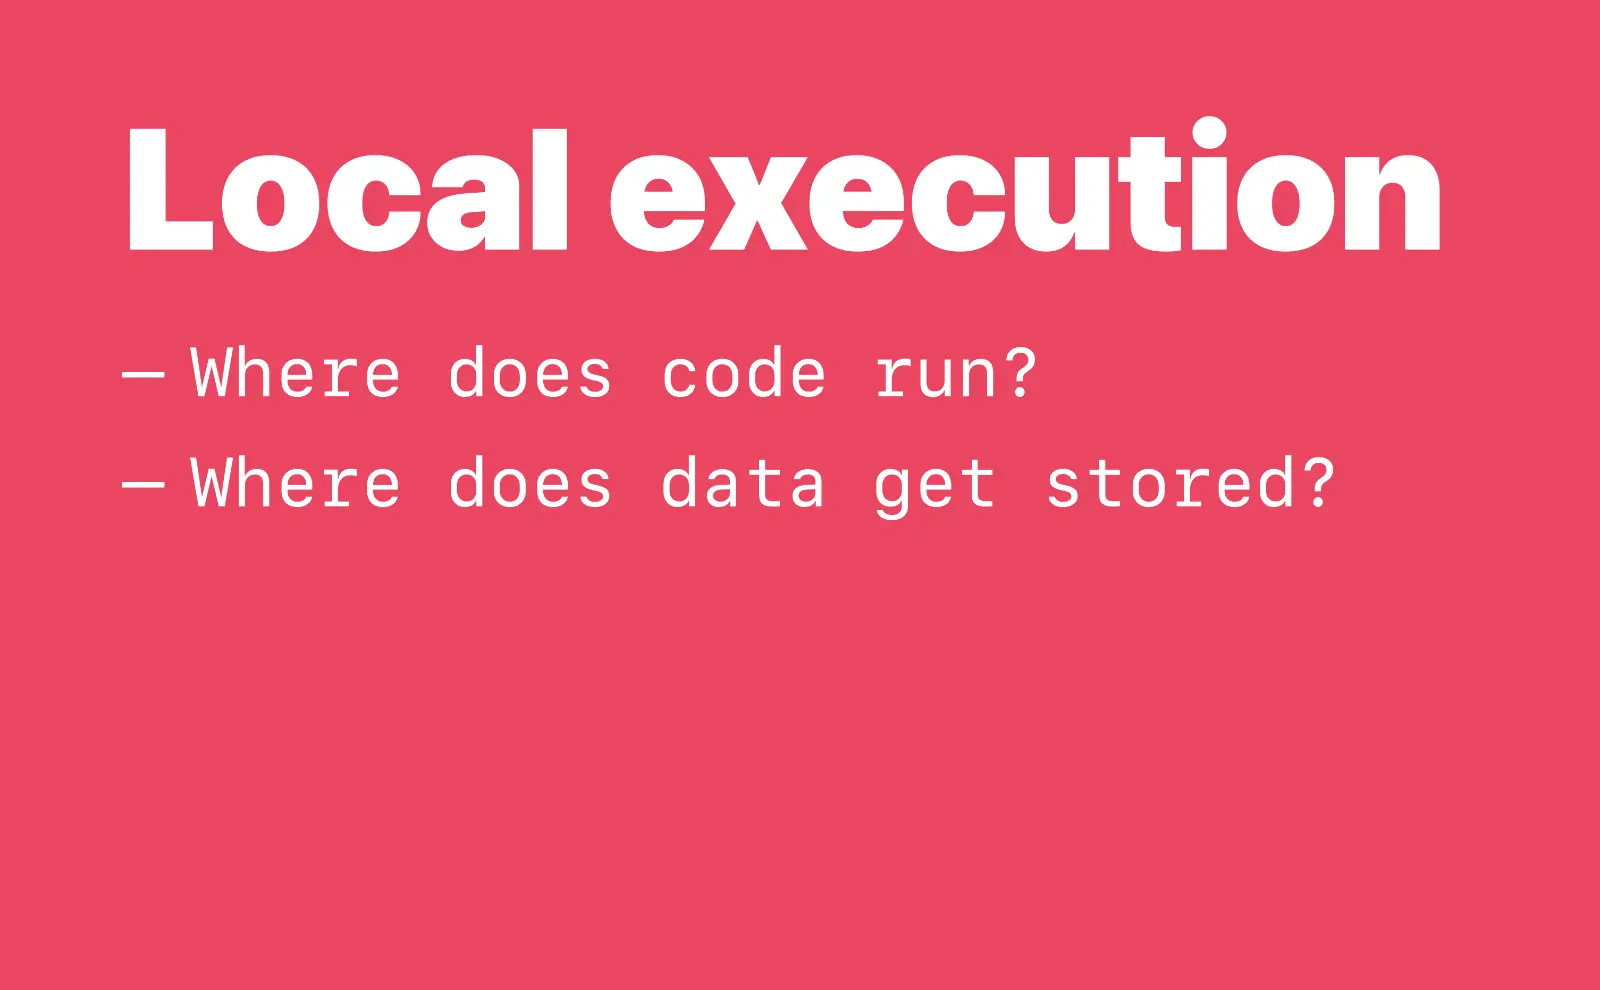 Local execution: Where does code run? Where does data get stored?